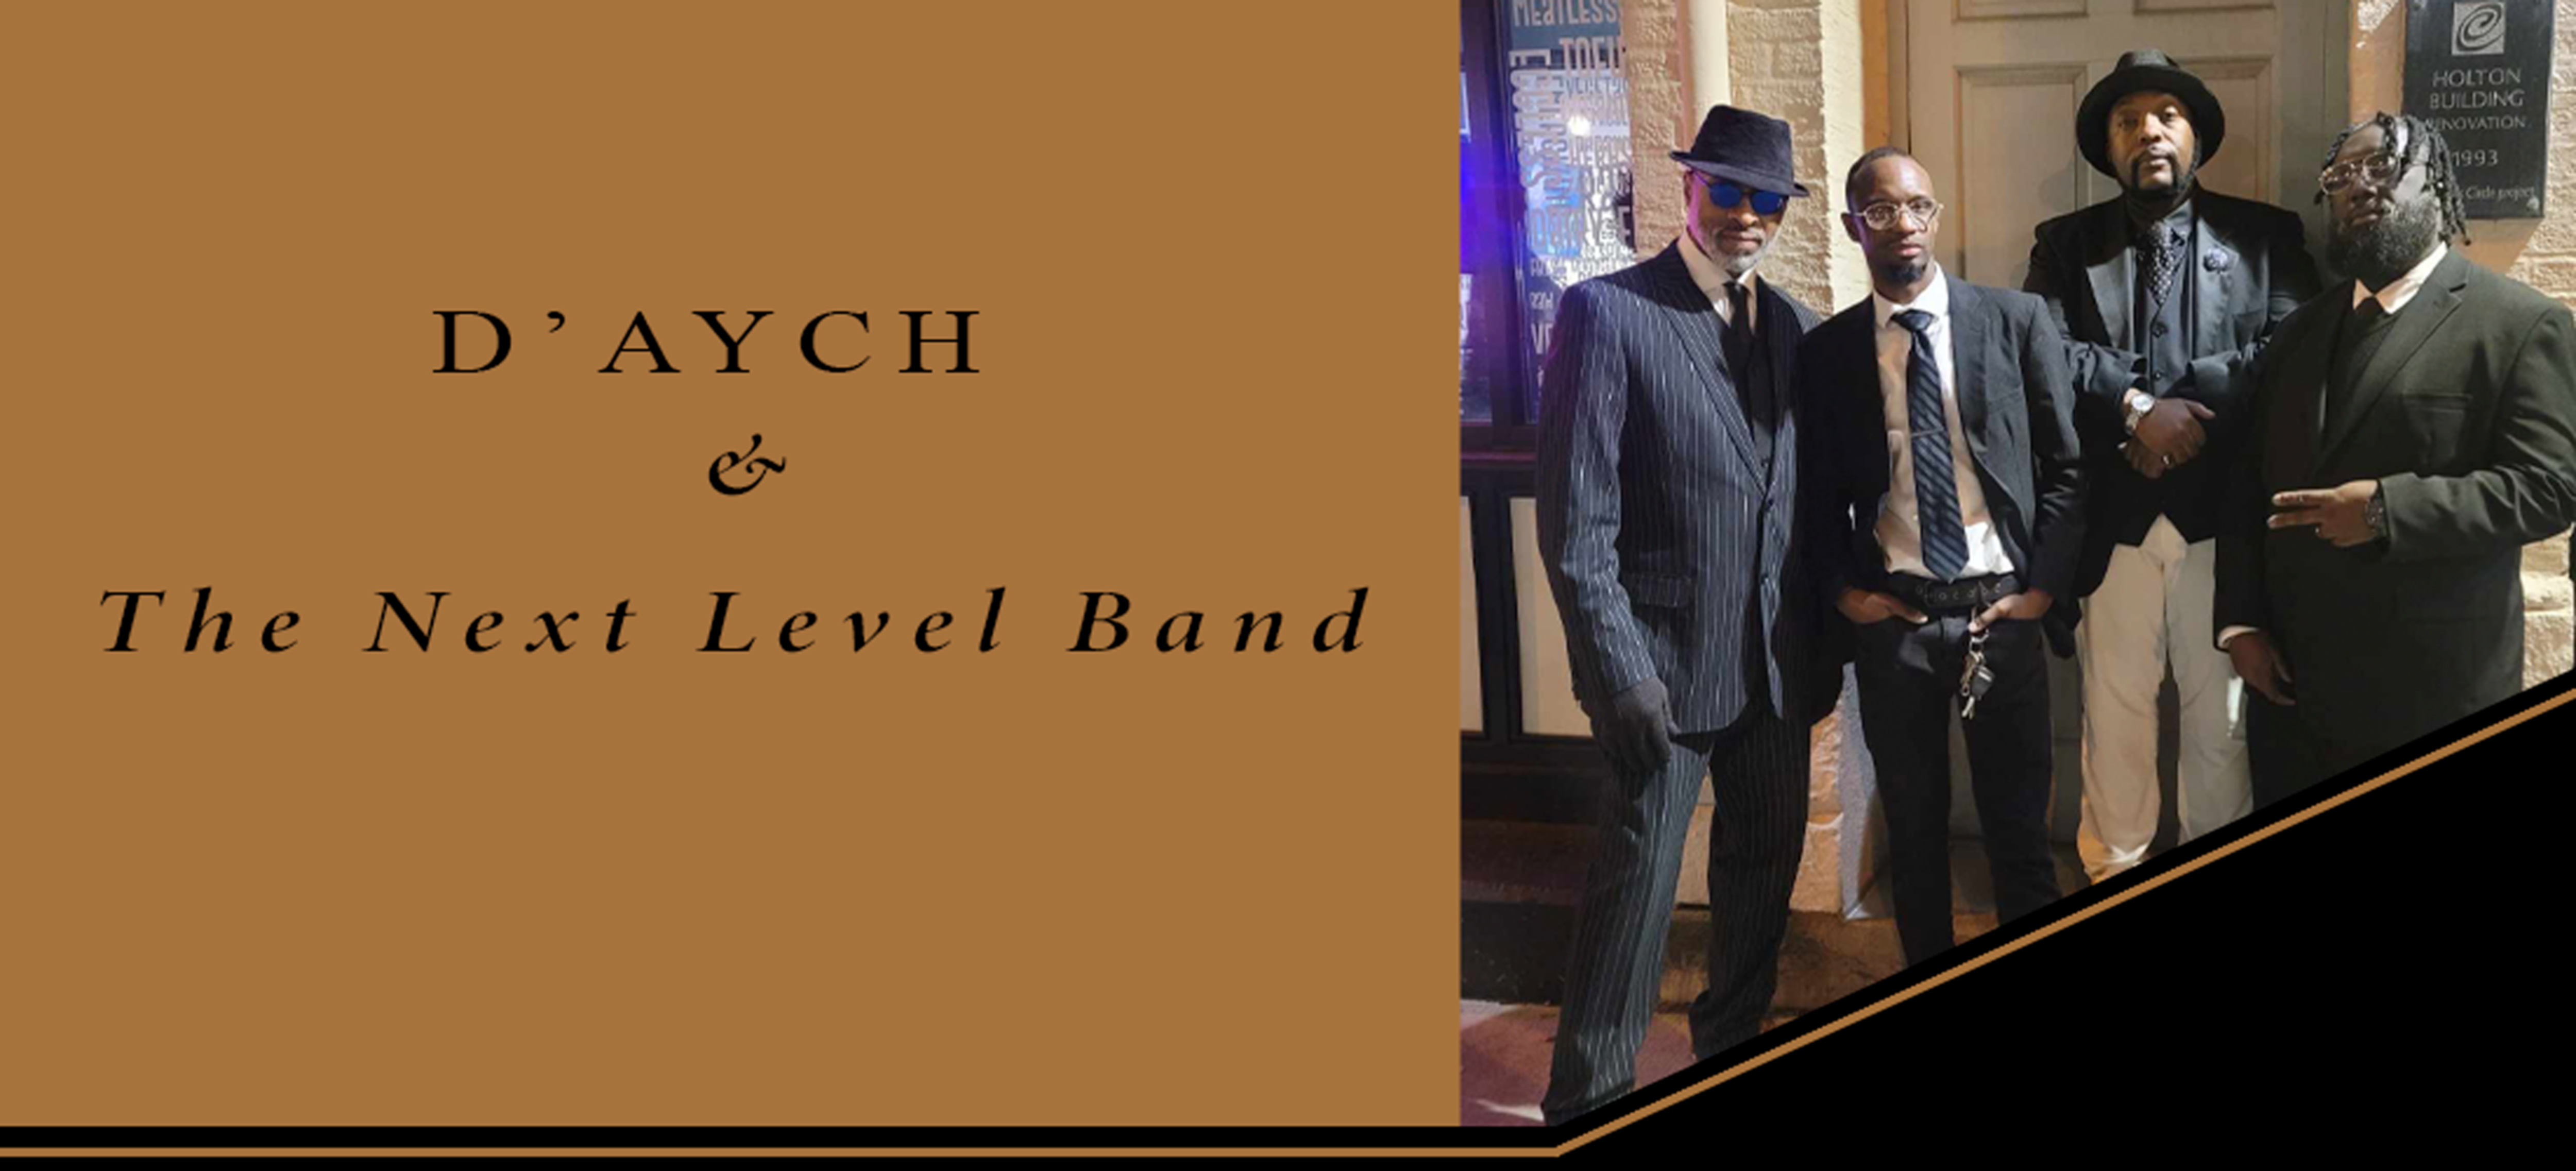 D'AYCH & The Next Level Band